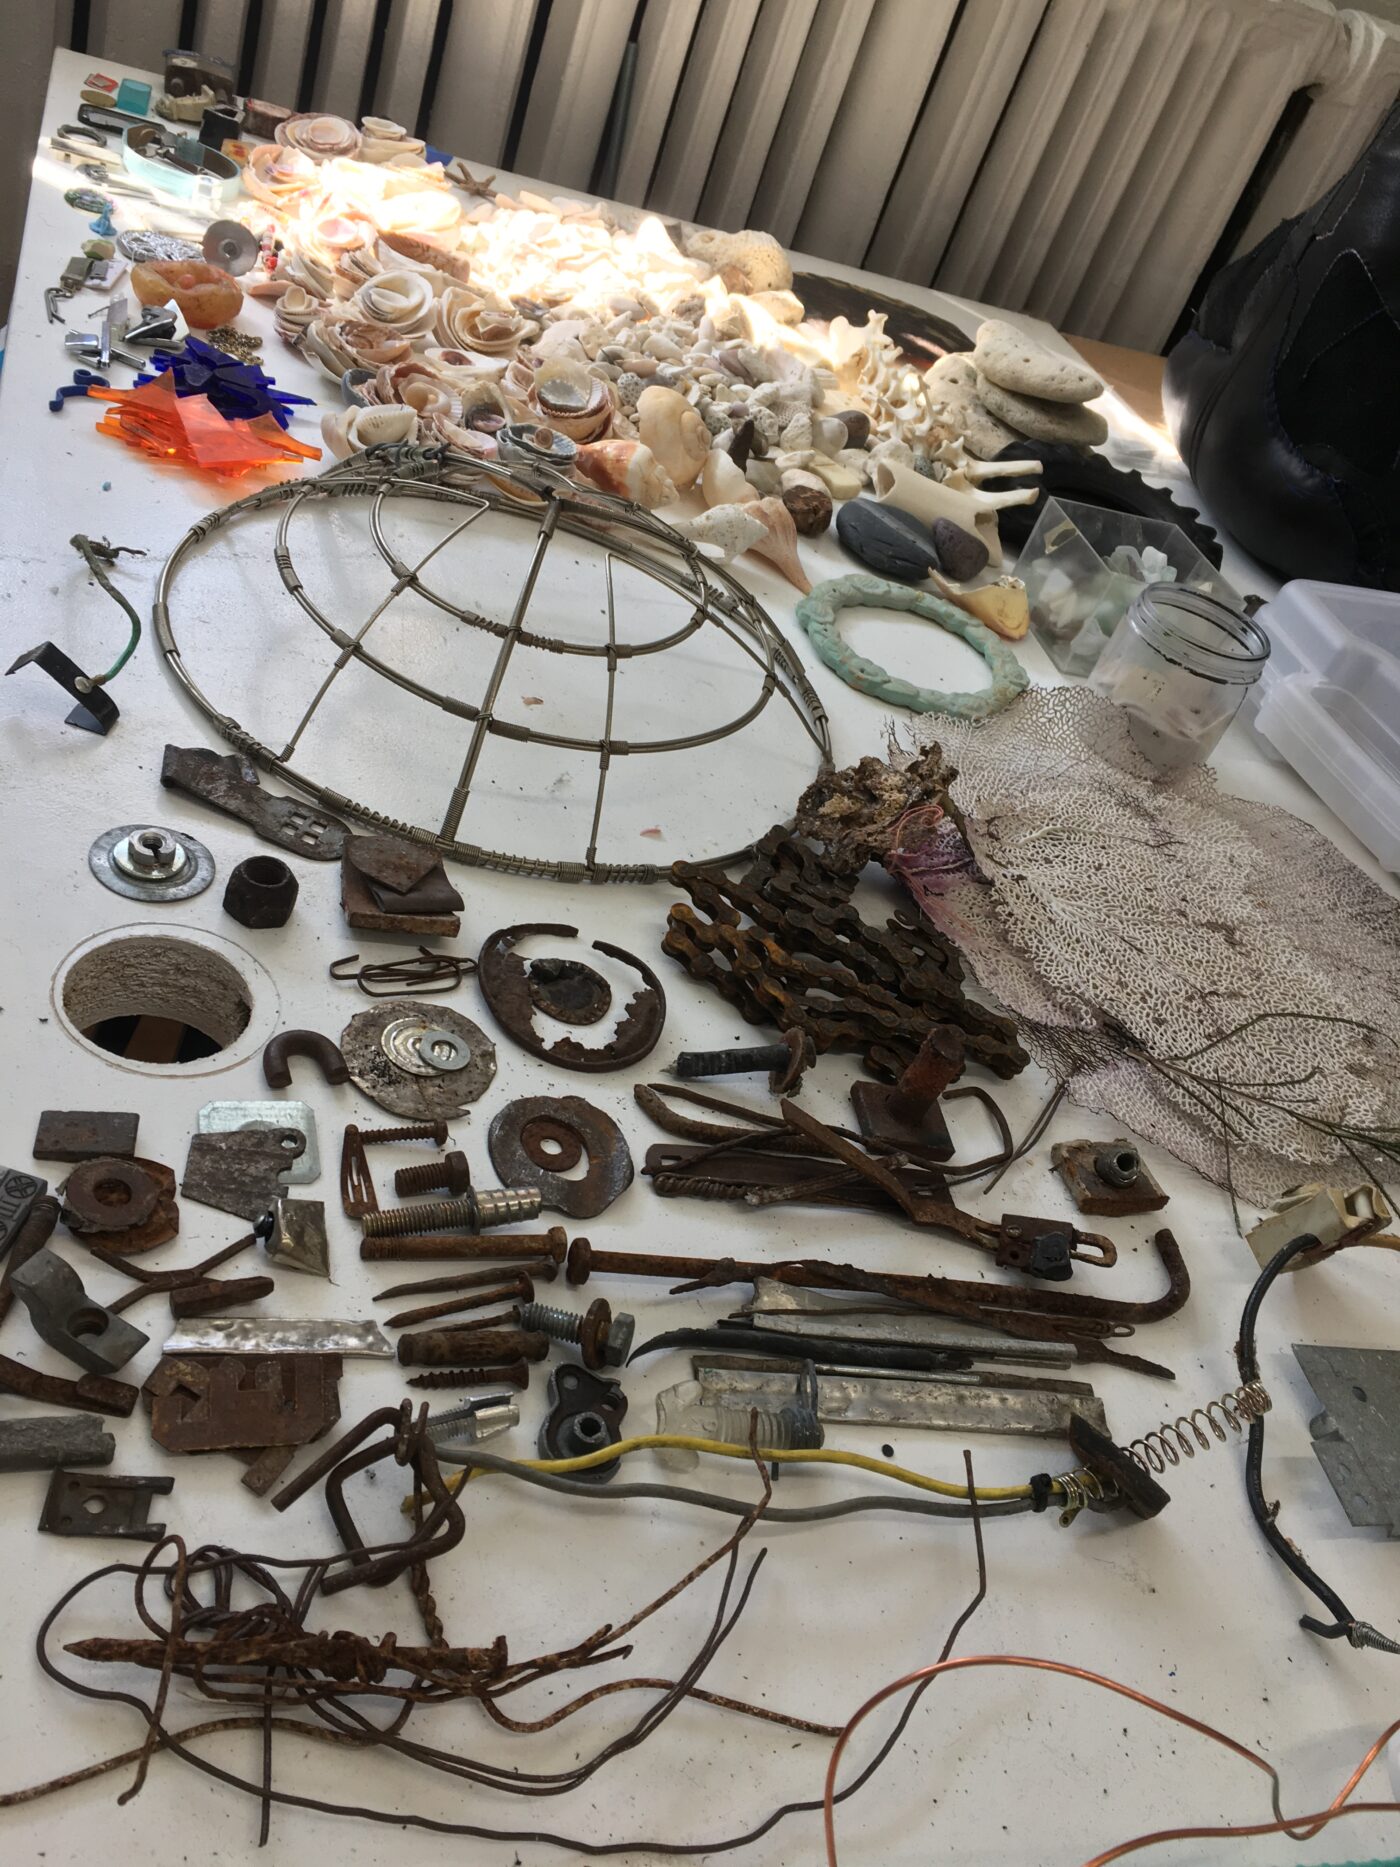 Image shows a white tabletop covered in pieces of scrap metal of various sizes.